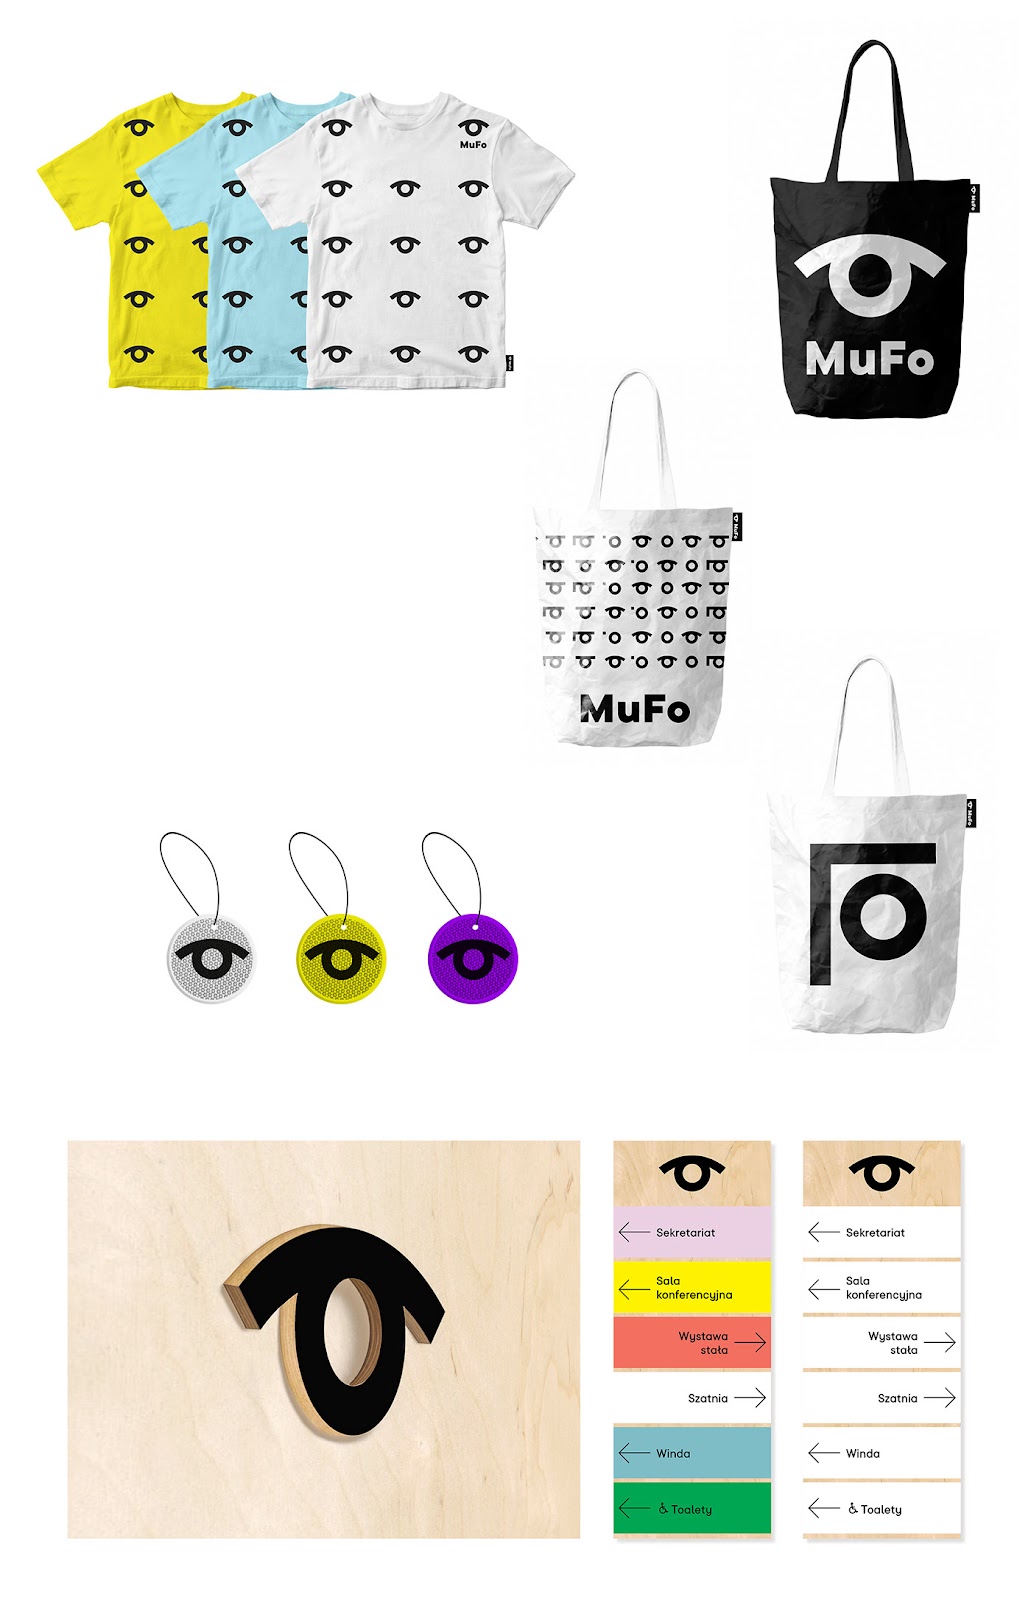 Artifact from the MuFo: Branding and Visual Identity for Photography Museum article on Abduzeedo